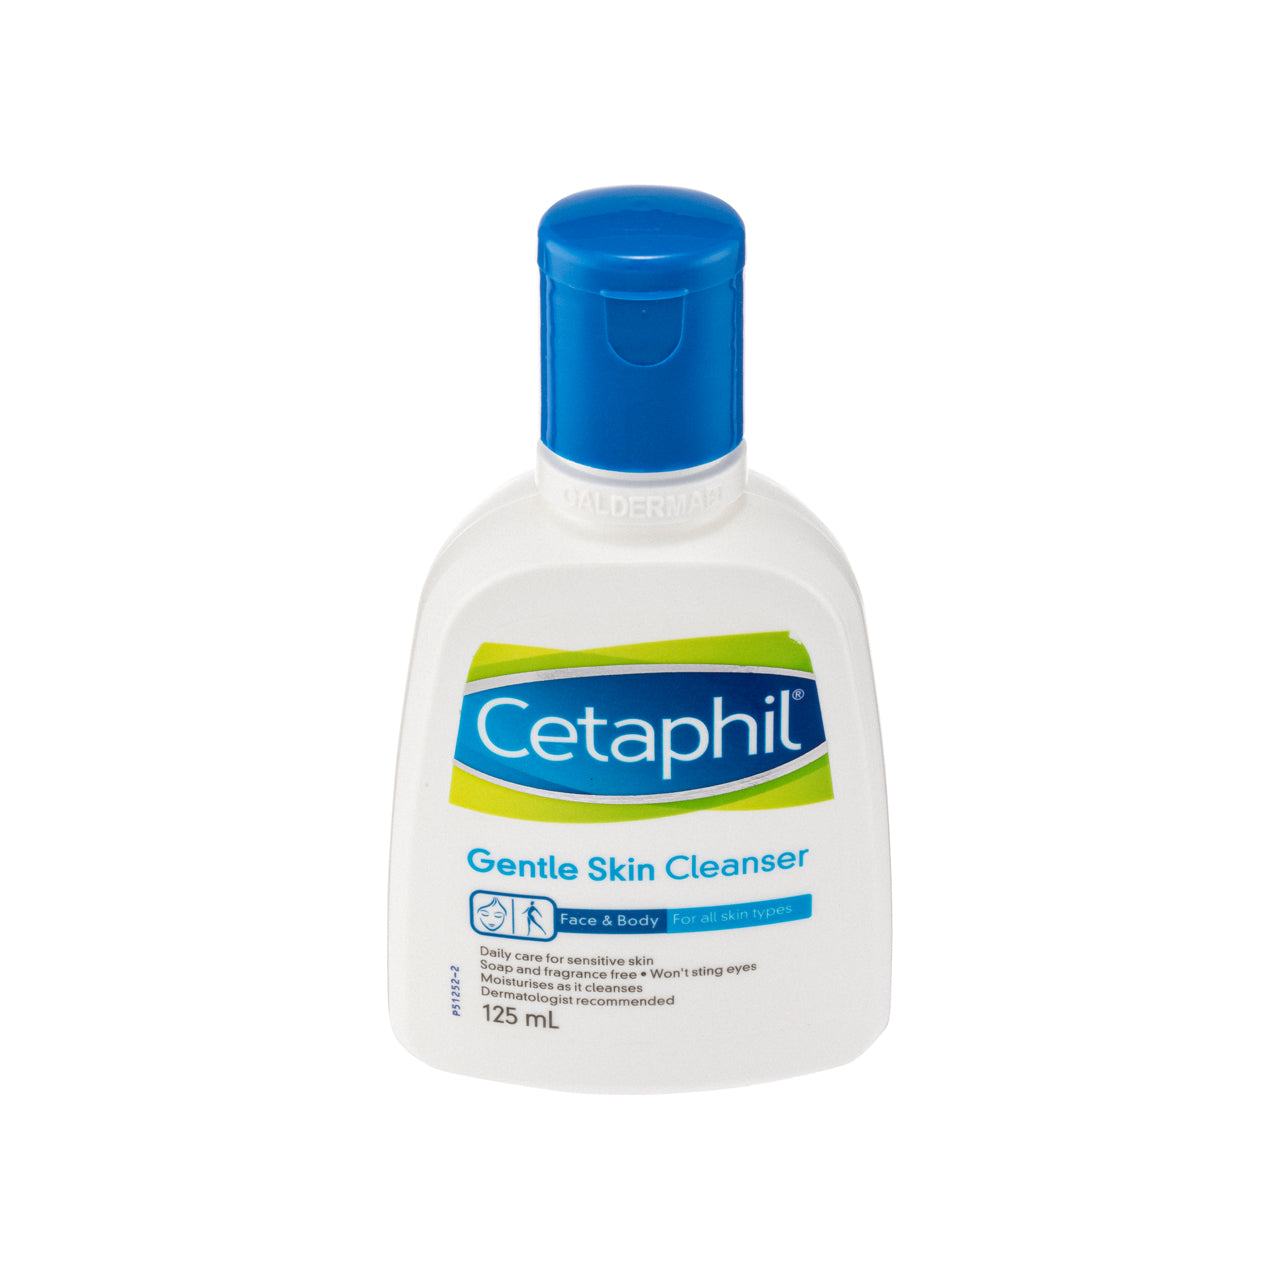 Cetaphil Gentle Skin Cleanser Eco-Friendly Boxless Edition